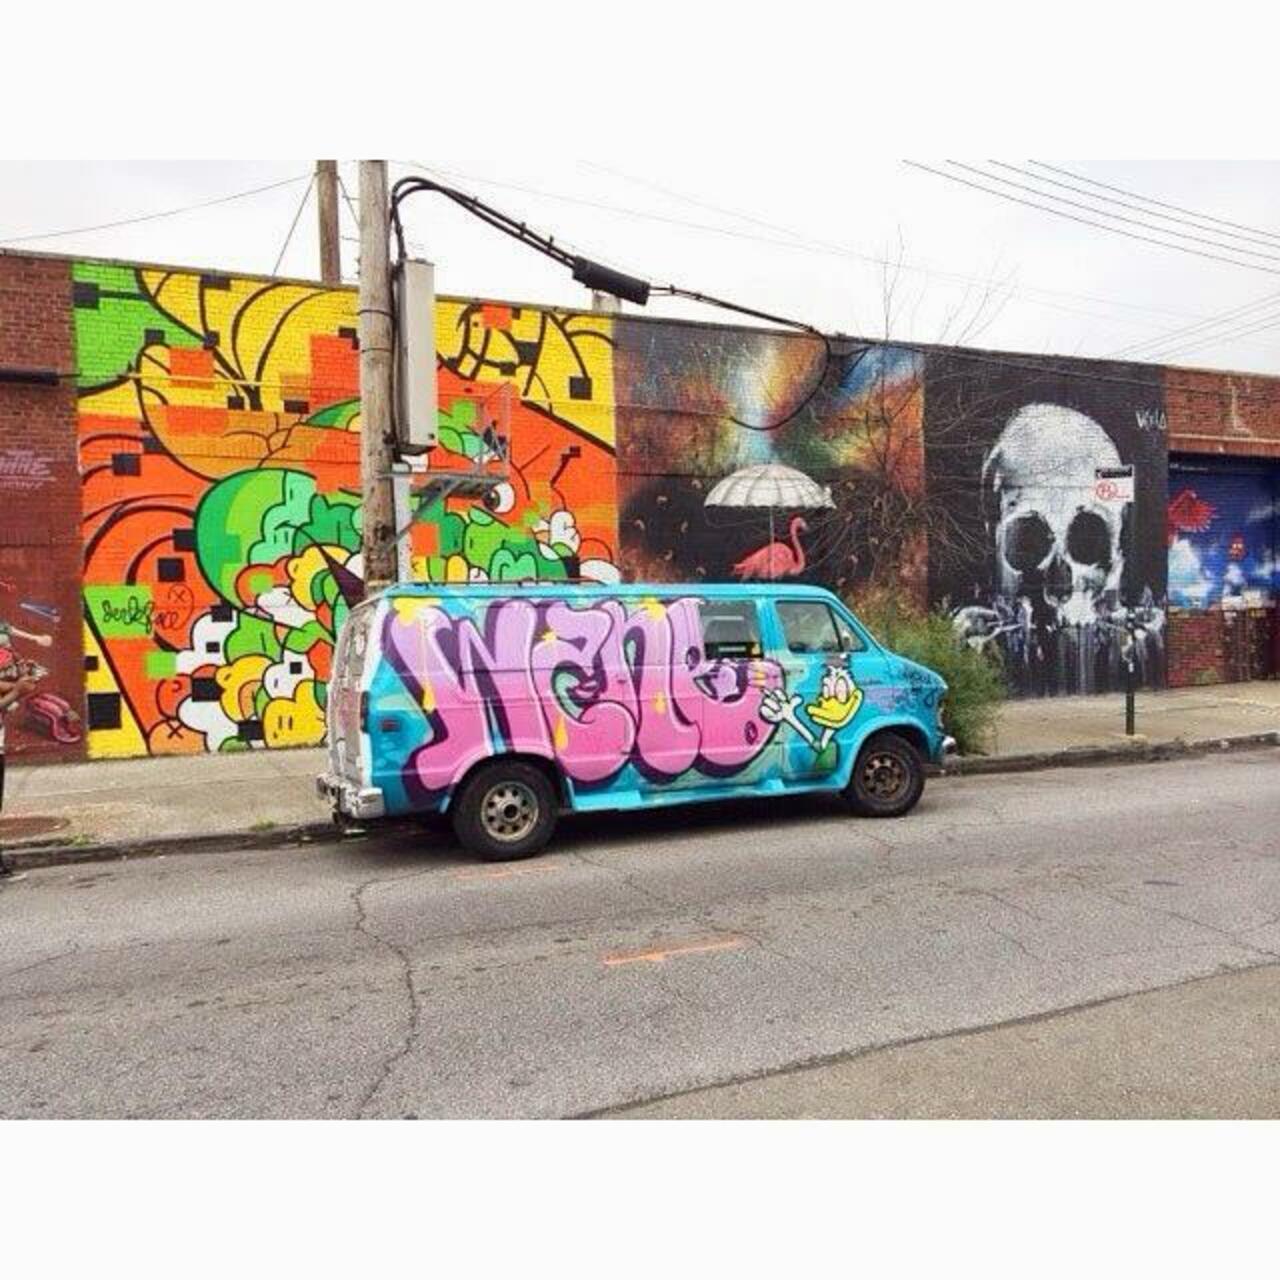 I saw this van in #brooklyn . Does anyone know of the #artist ? #streetart #graffiti http://t.co/md5vlLFCUz